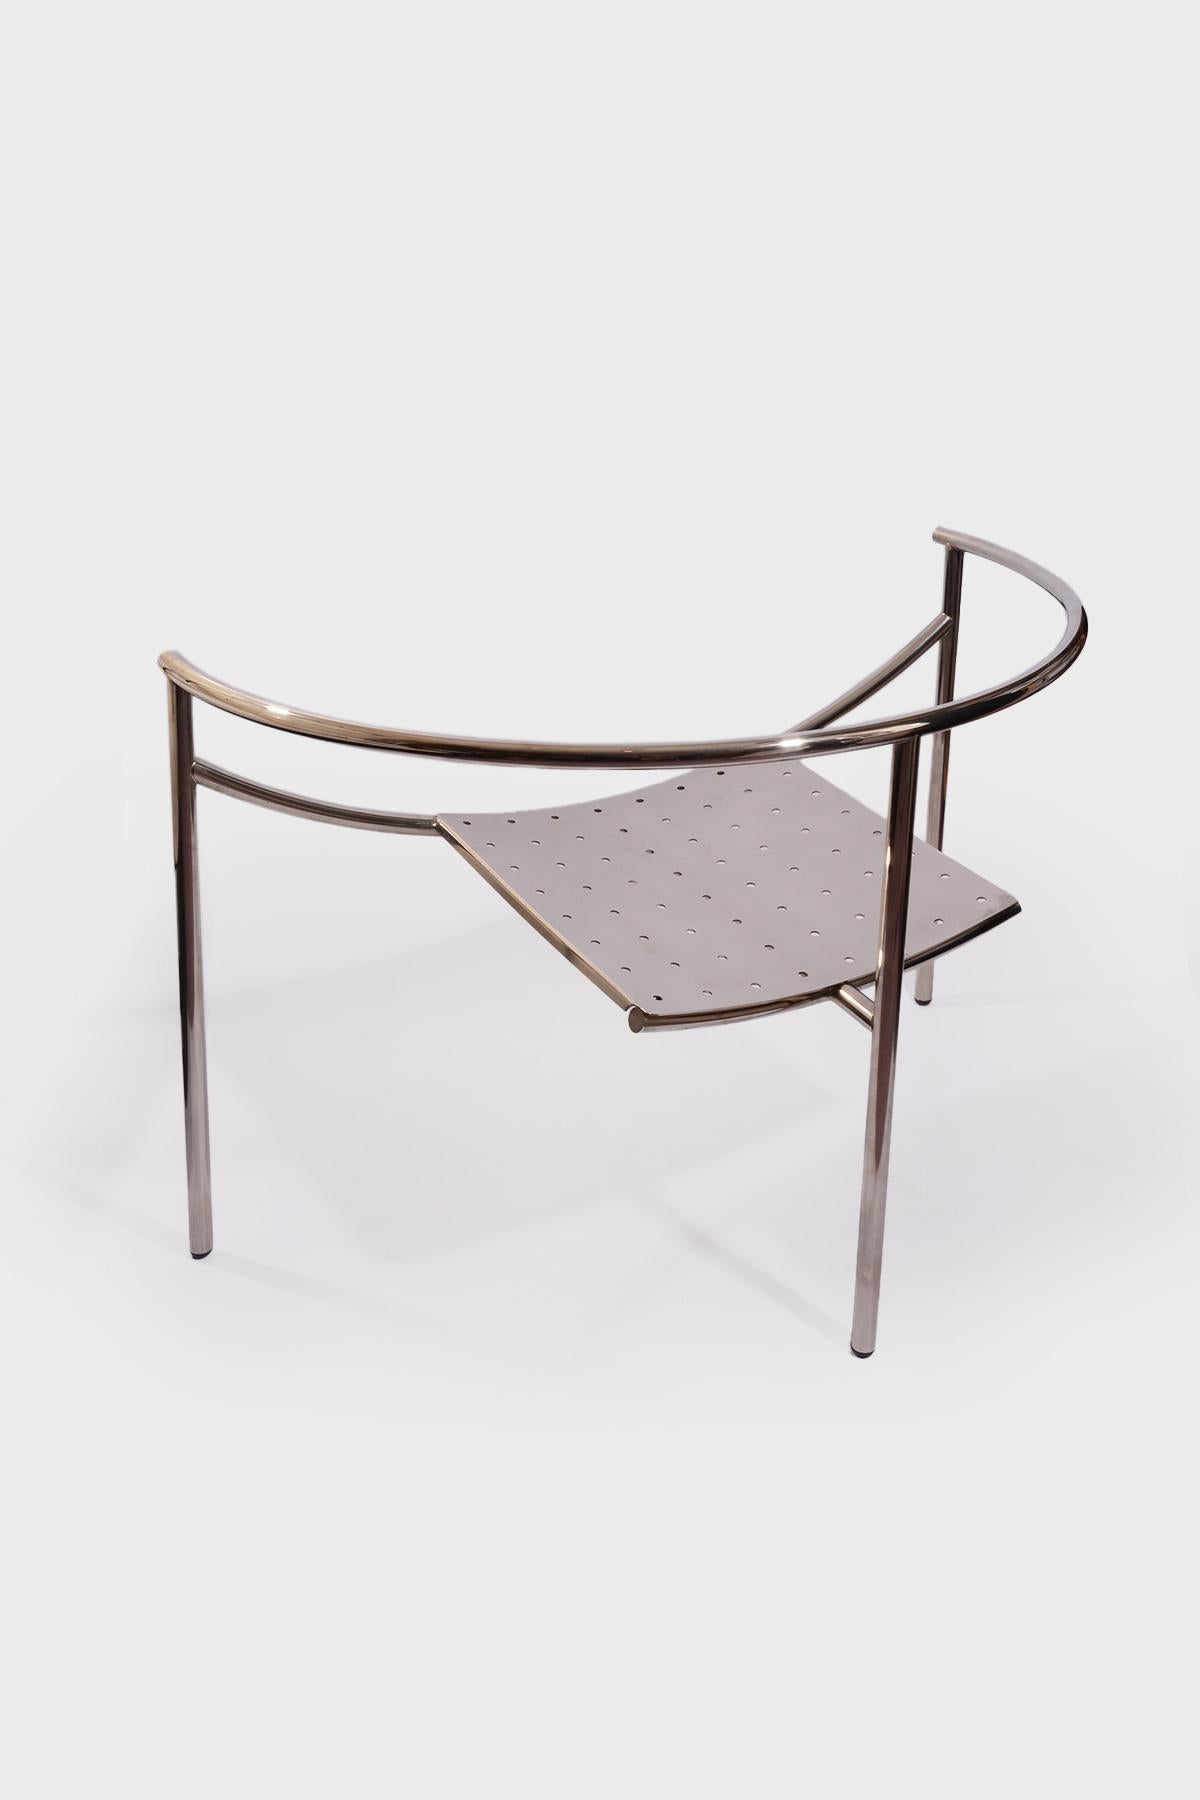 French Philippe Starck 'Dr. Sonderbar' Chair for XO Design, 1983 For Sale